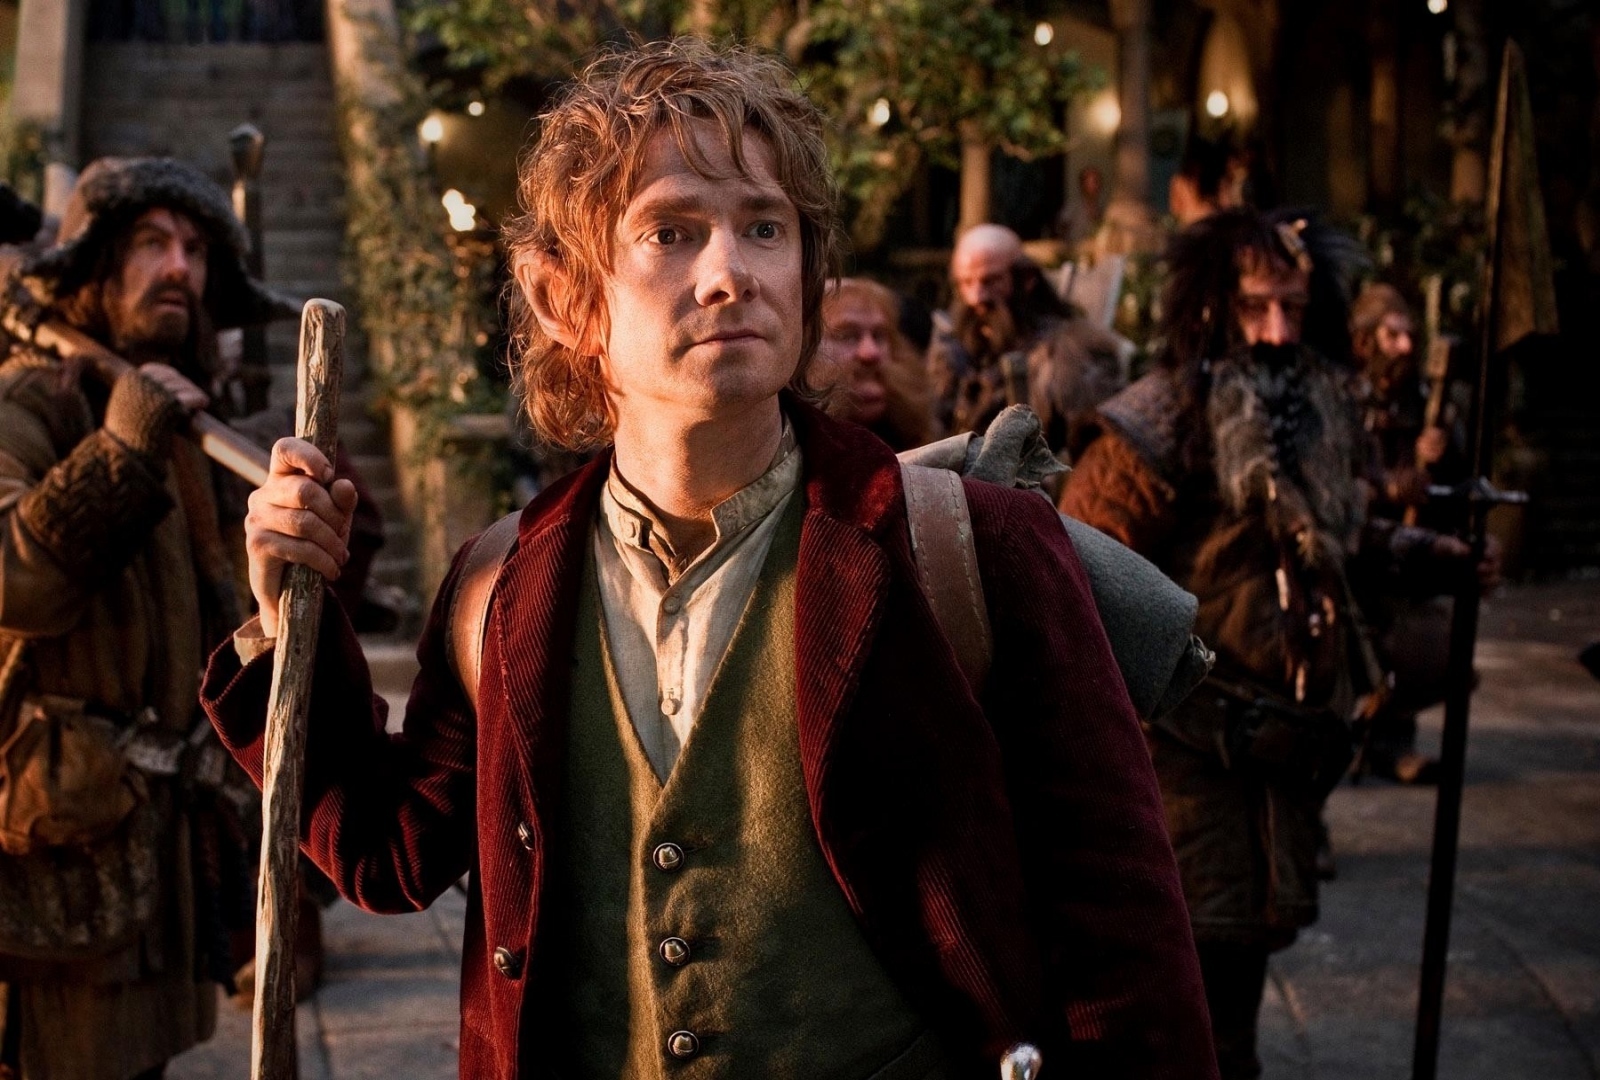 'The Hobbit: An Unexpected Journey' (2012)